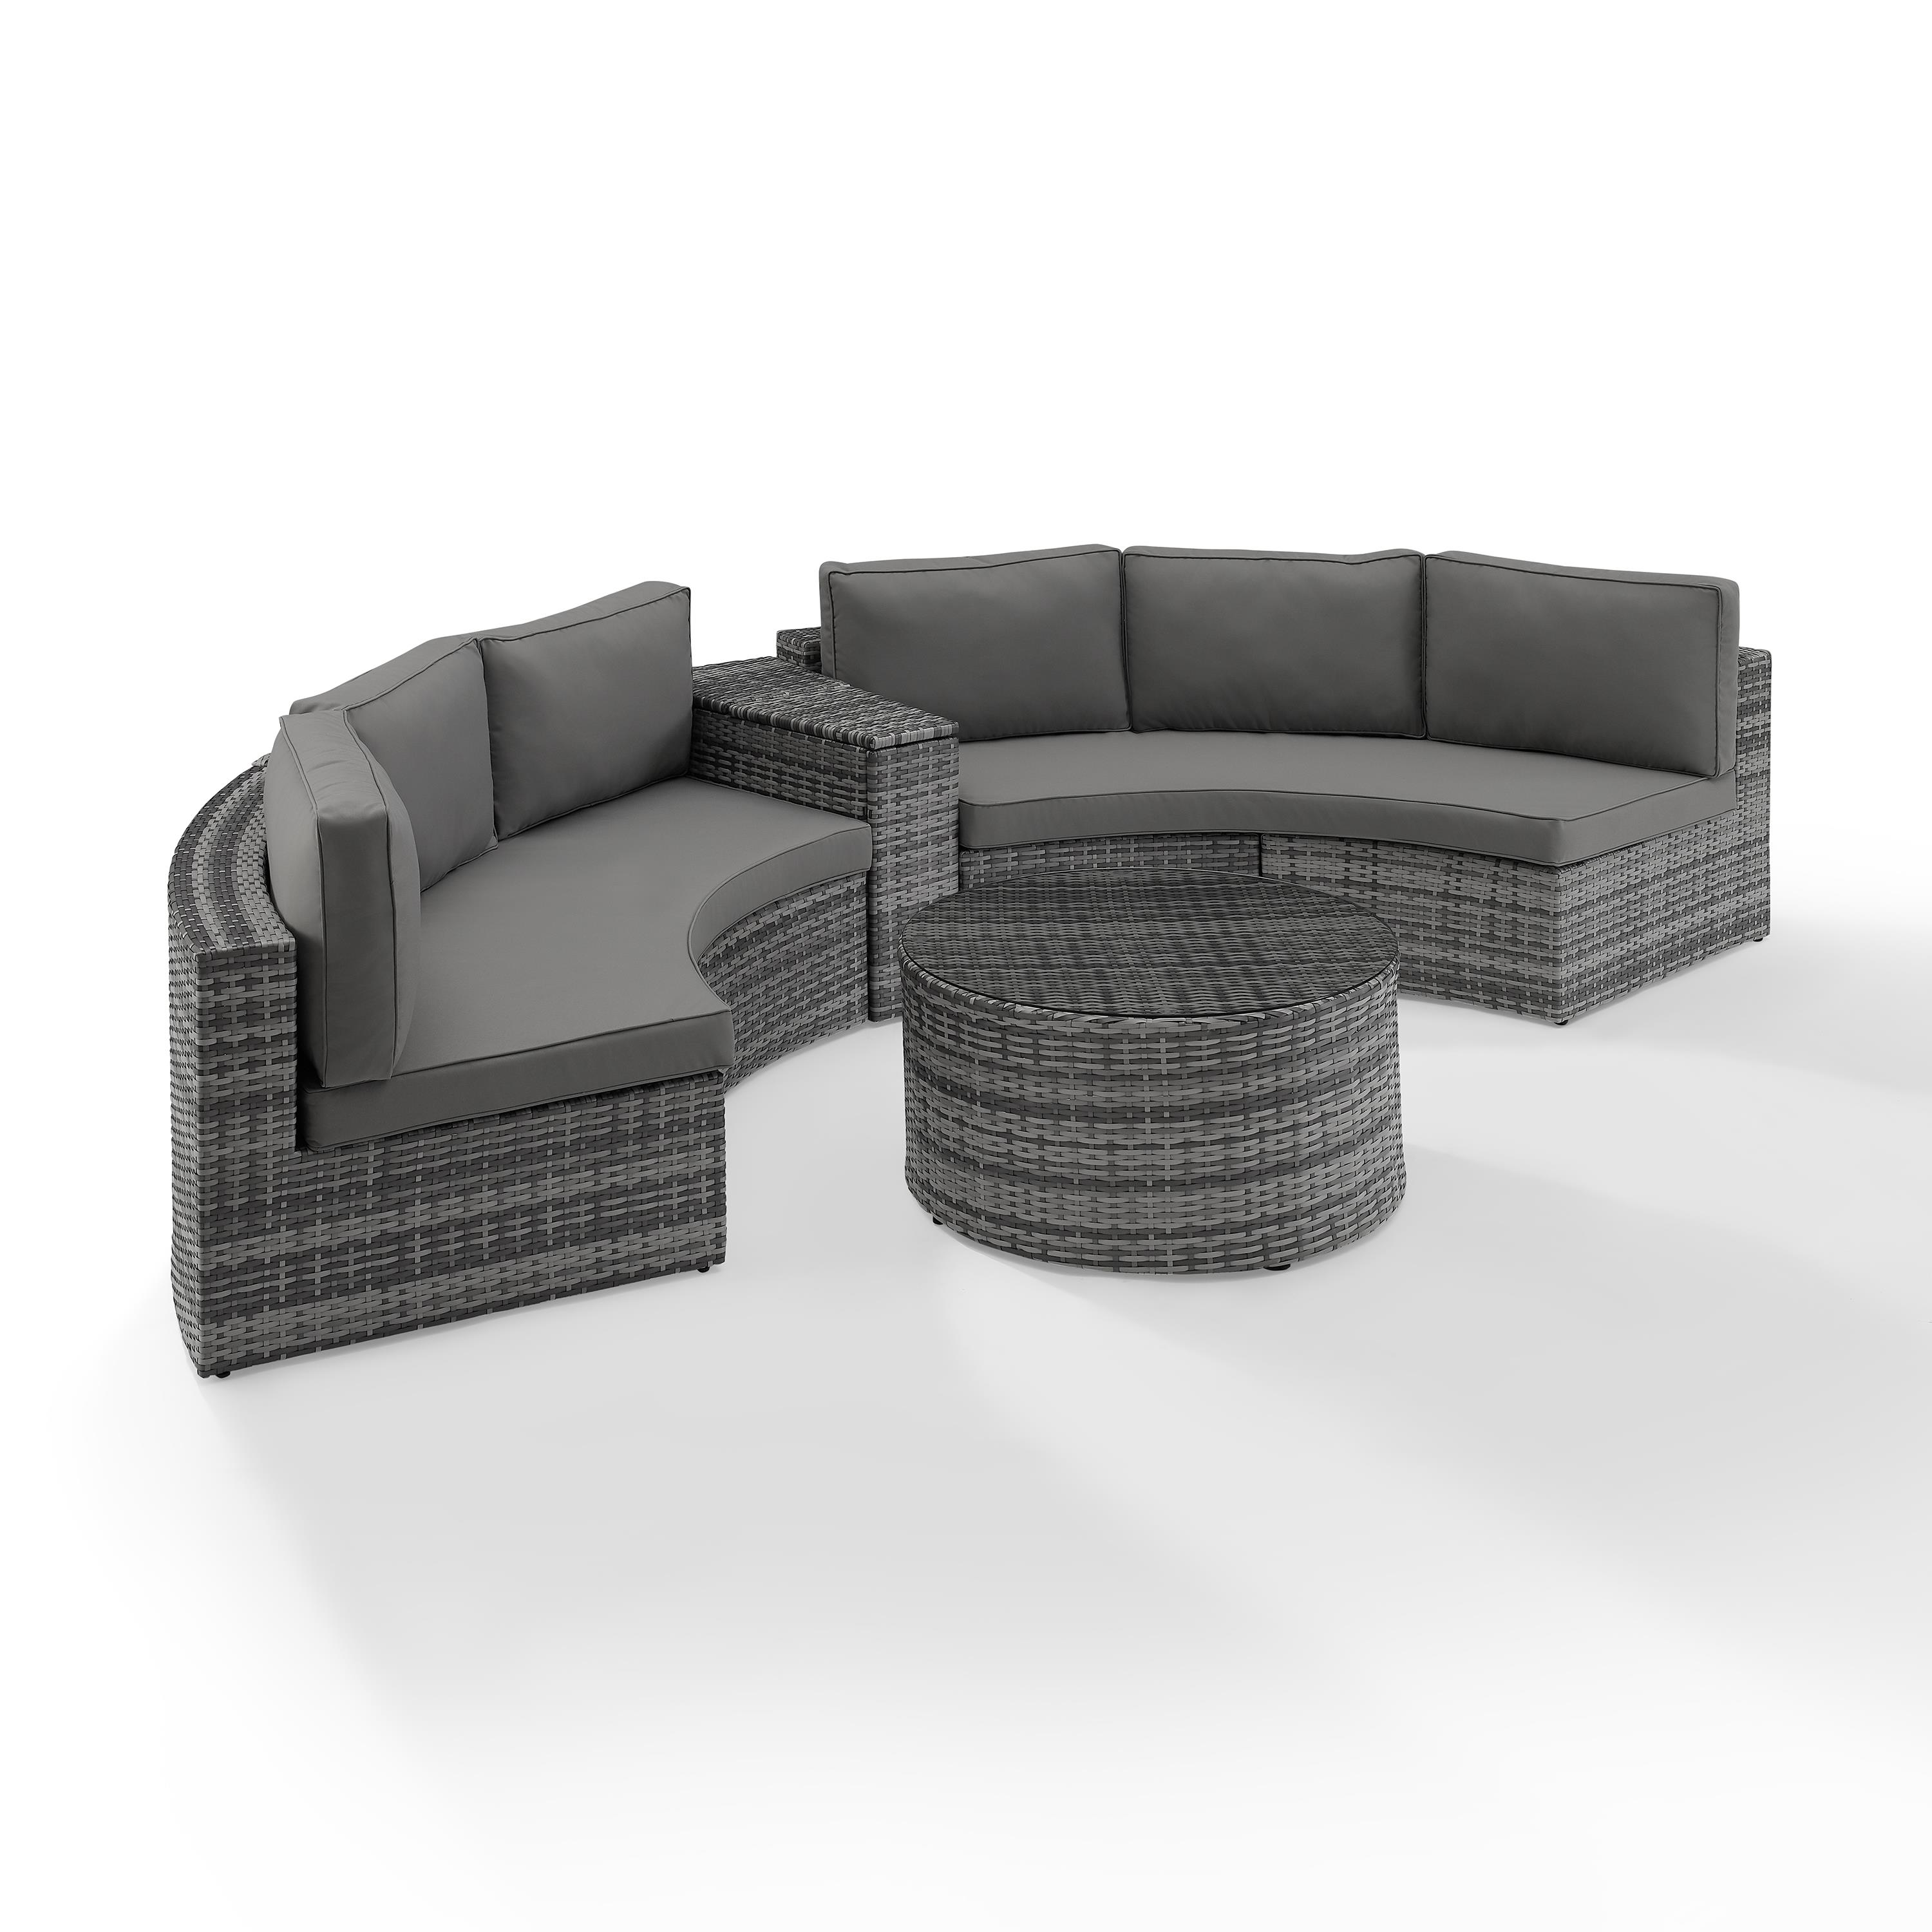 Crosley Catalina 4Pc Outdoor Wicker Sectional Set Gray/Gray - Arm Table, Round Glass Top Coffee Table, & 2 Round Sectional Sofas - image 2 of 9